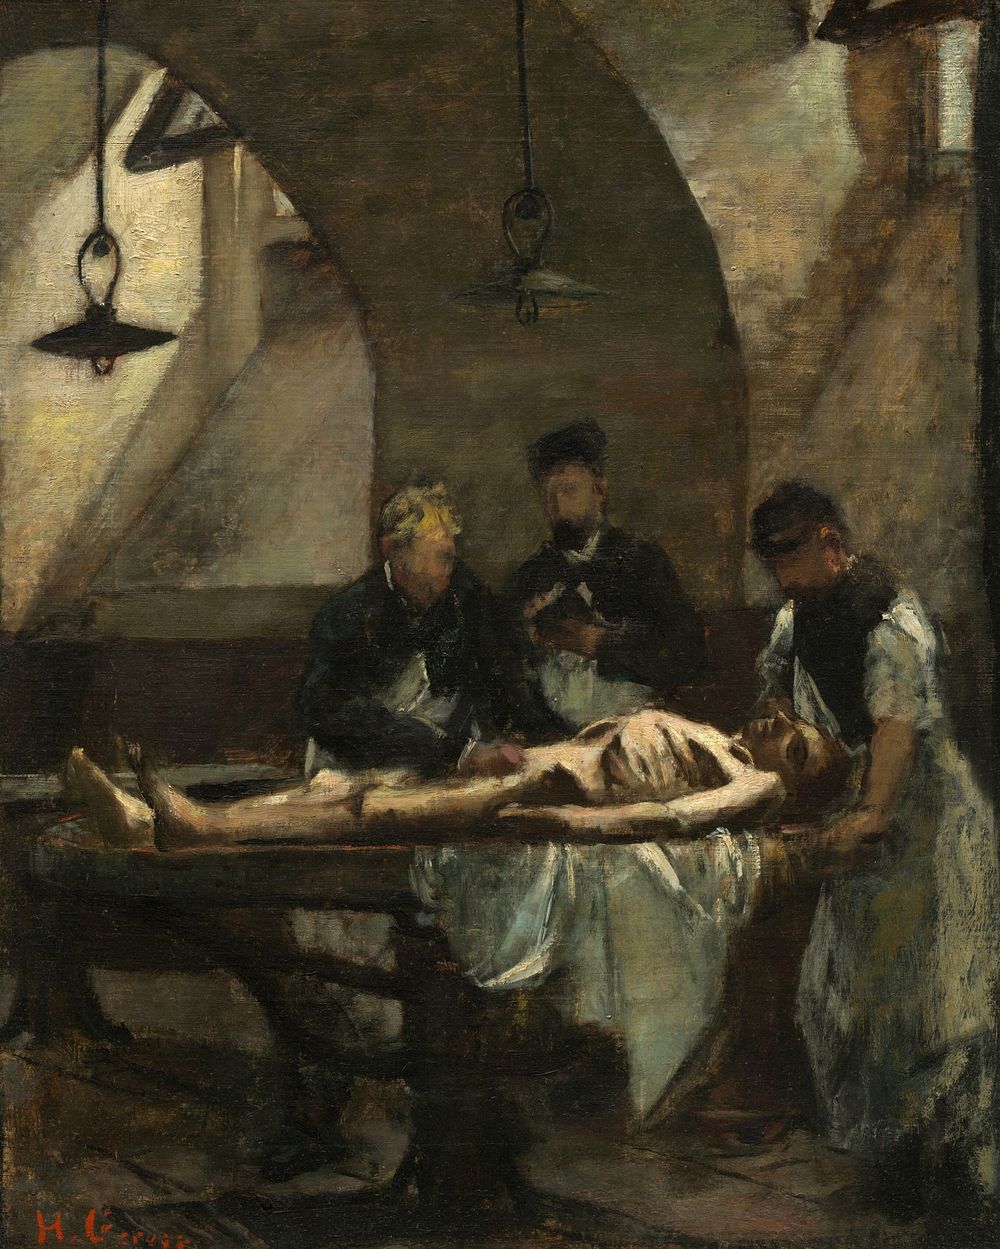 Study for "Autopsy at the H&ocirc;tel-Dieu" (ca. 1876) by George Peter Alexander Healy.  